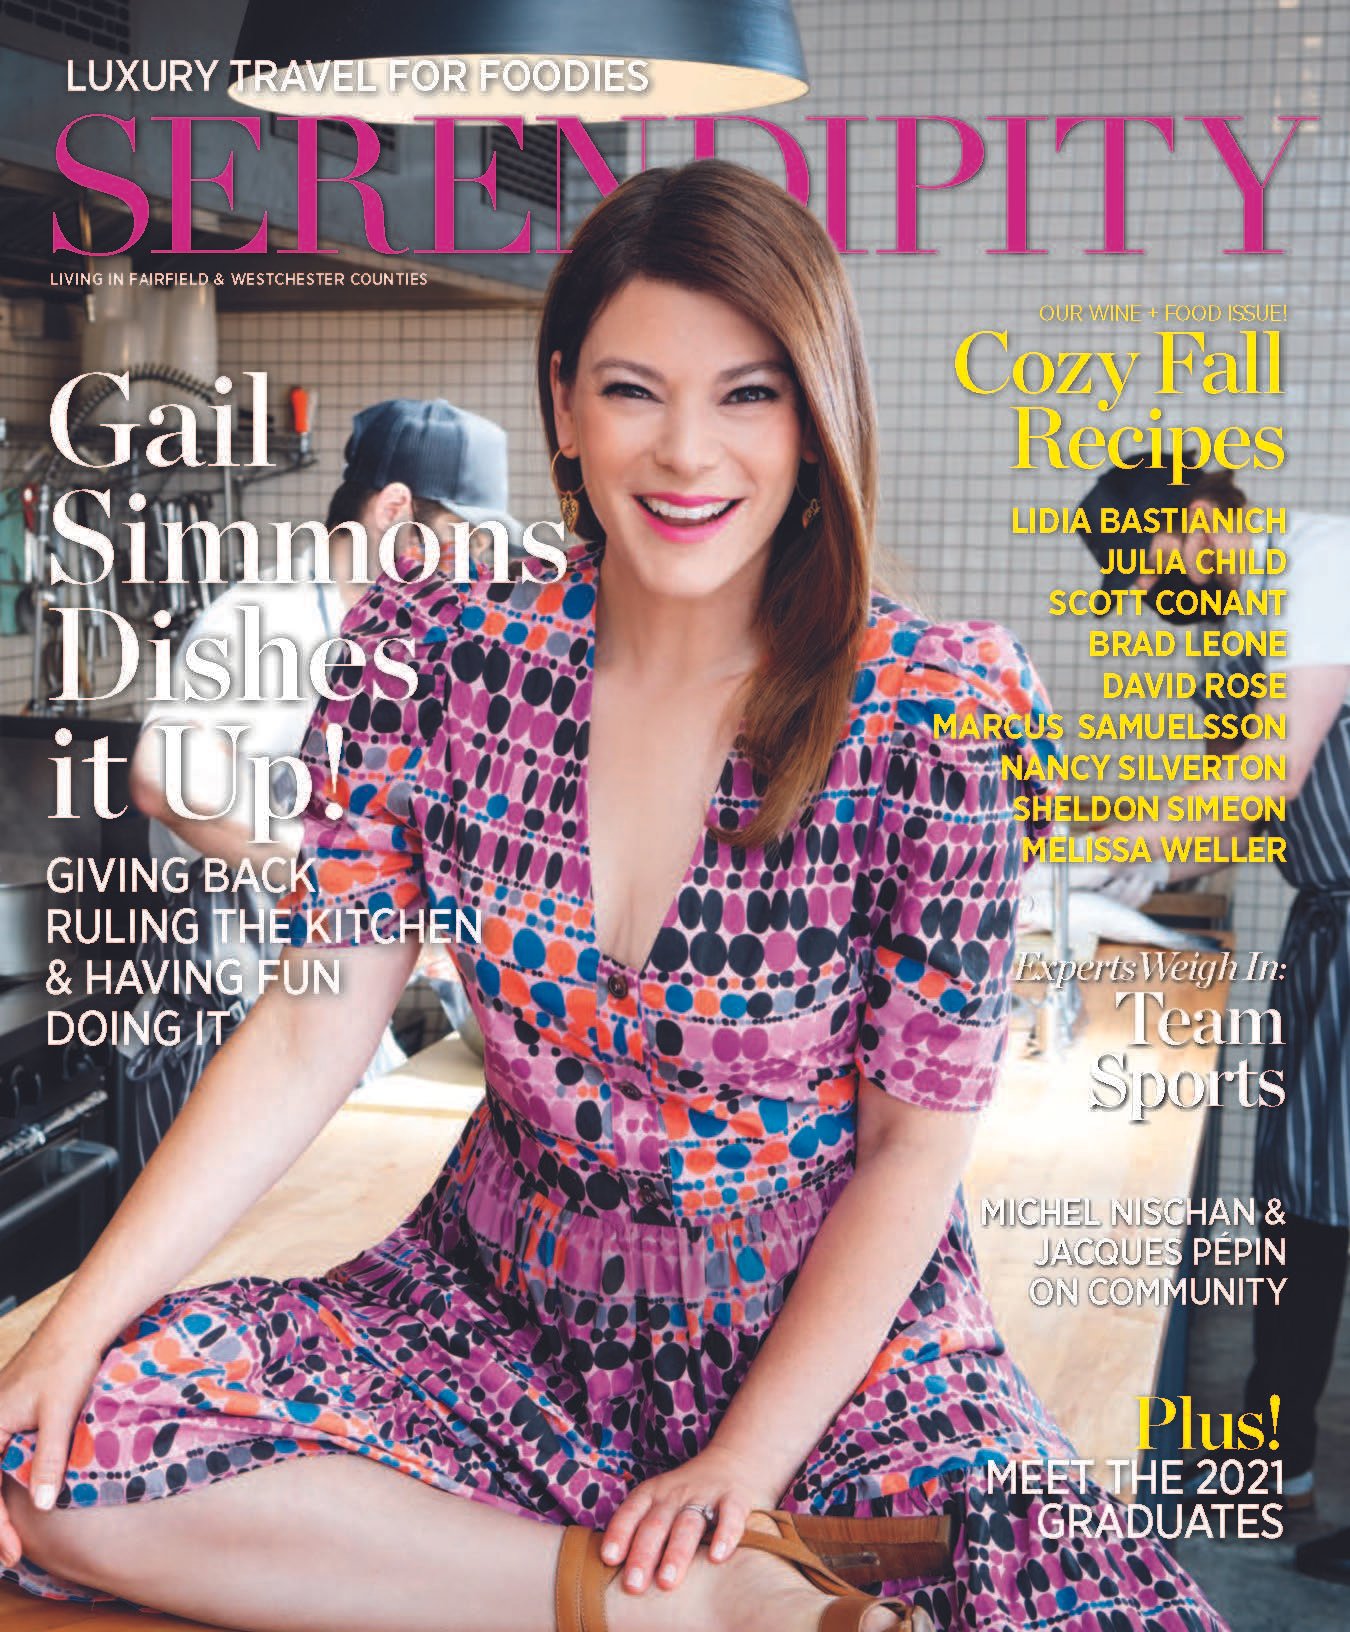 Gail Simmons Serendipity SO21_Page_1.jpg